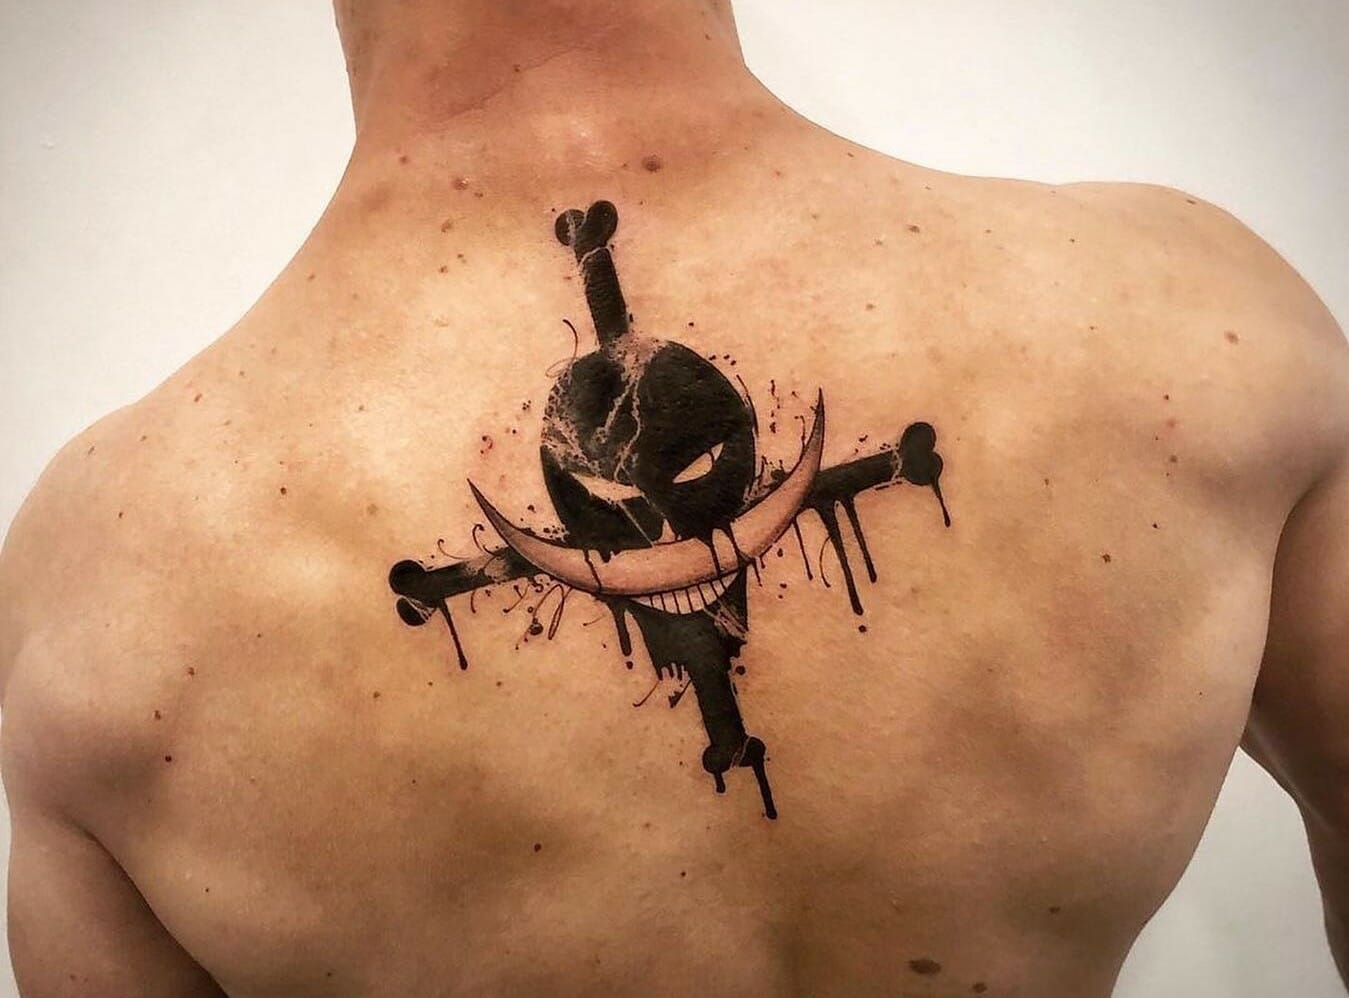 10 Whitebeard Tattoo Ideas That Will Blow Your Mind!

+2023